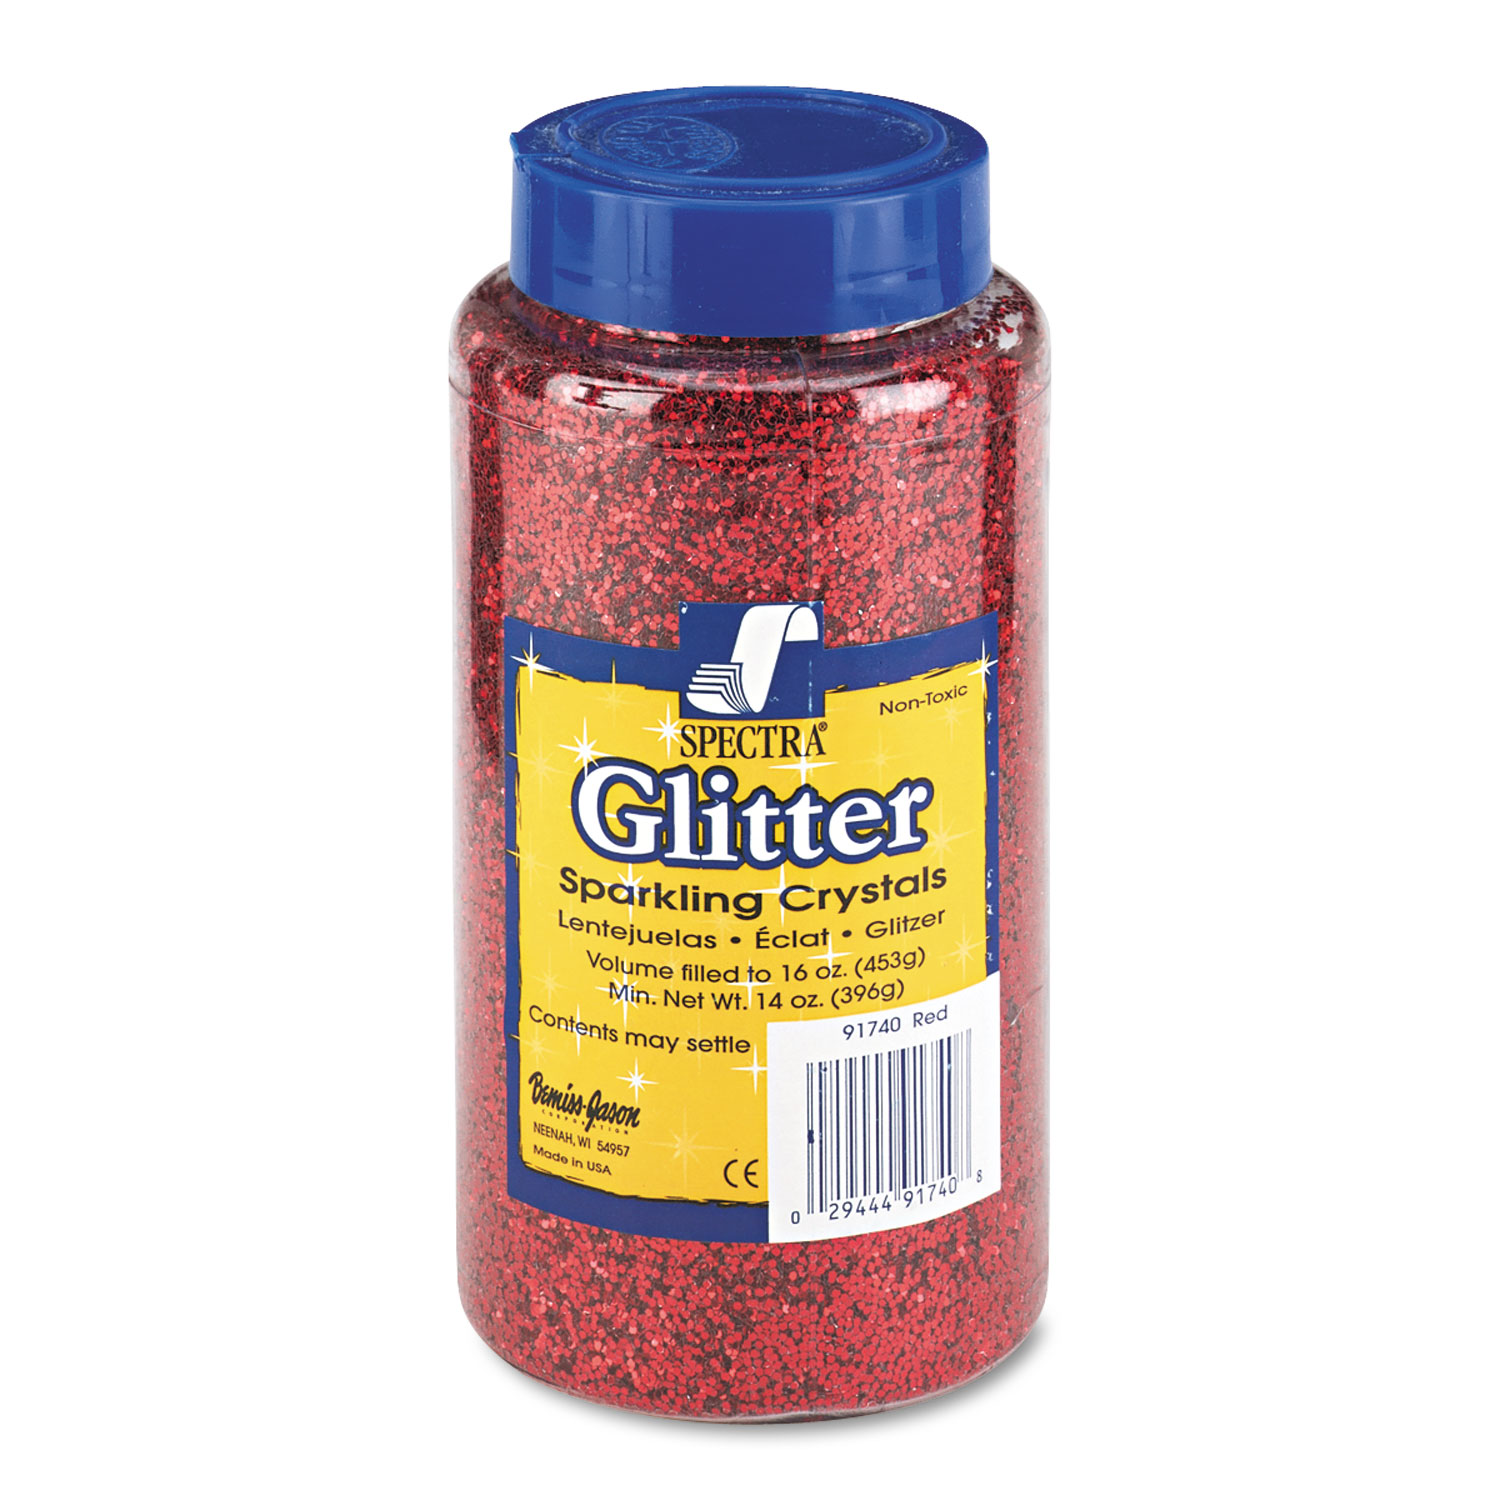  Pacon 91740 Spectra Glitter, .04 Hexagon Crystals, Red, 16 oz Shaker-Top Jar (PAC91740) 